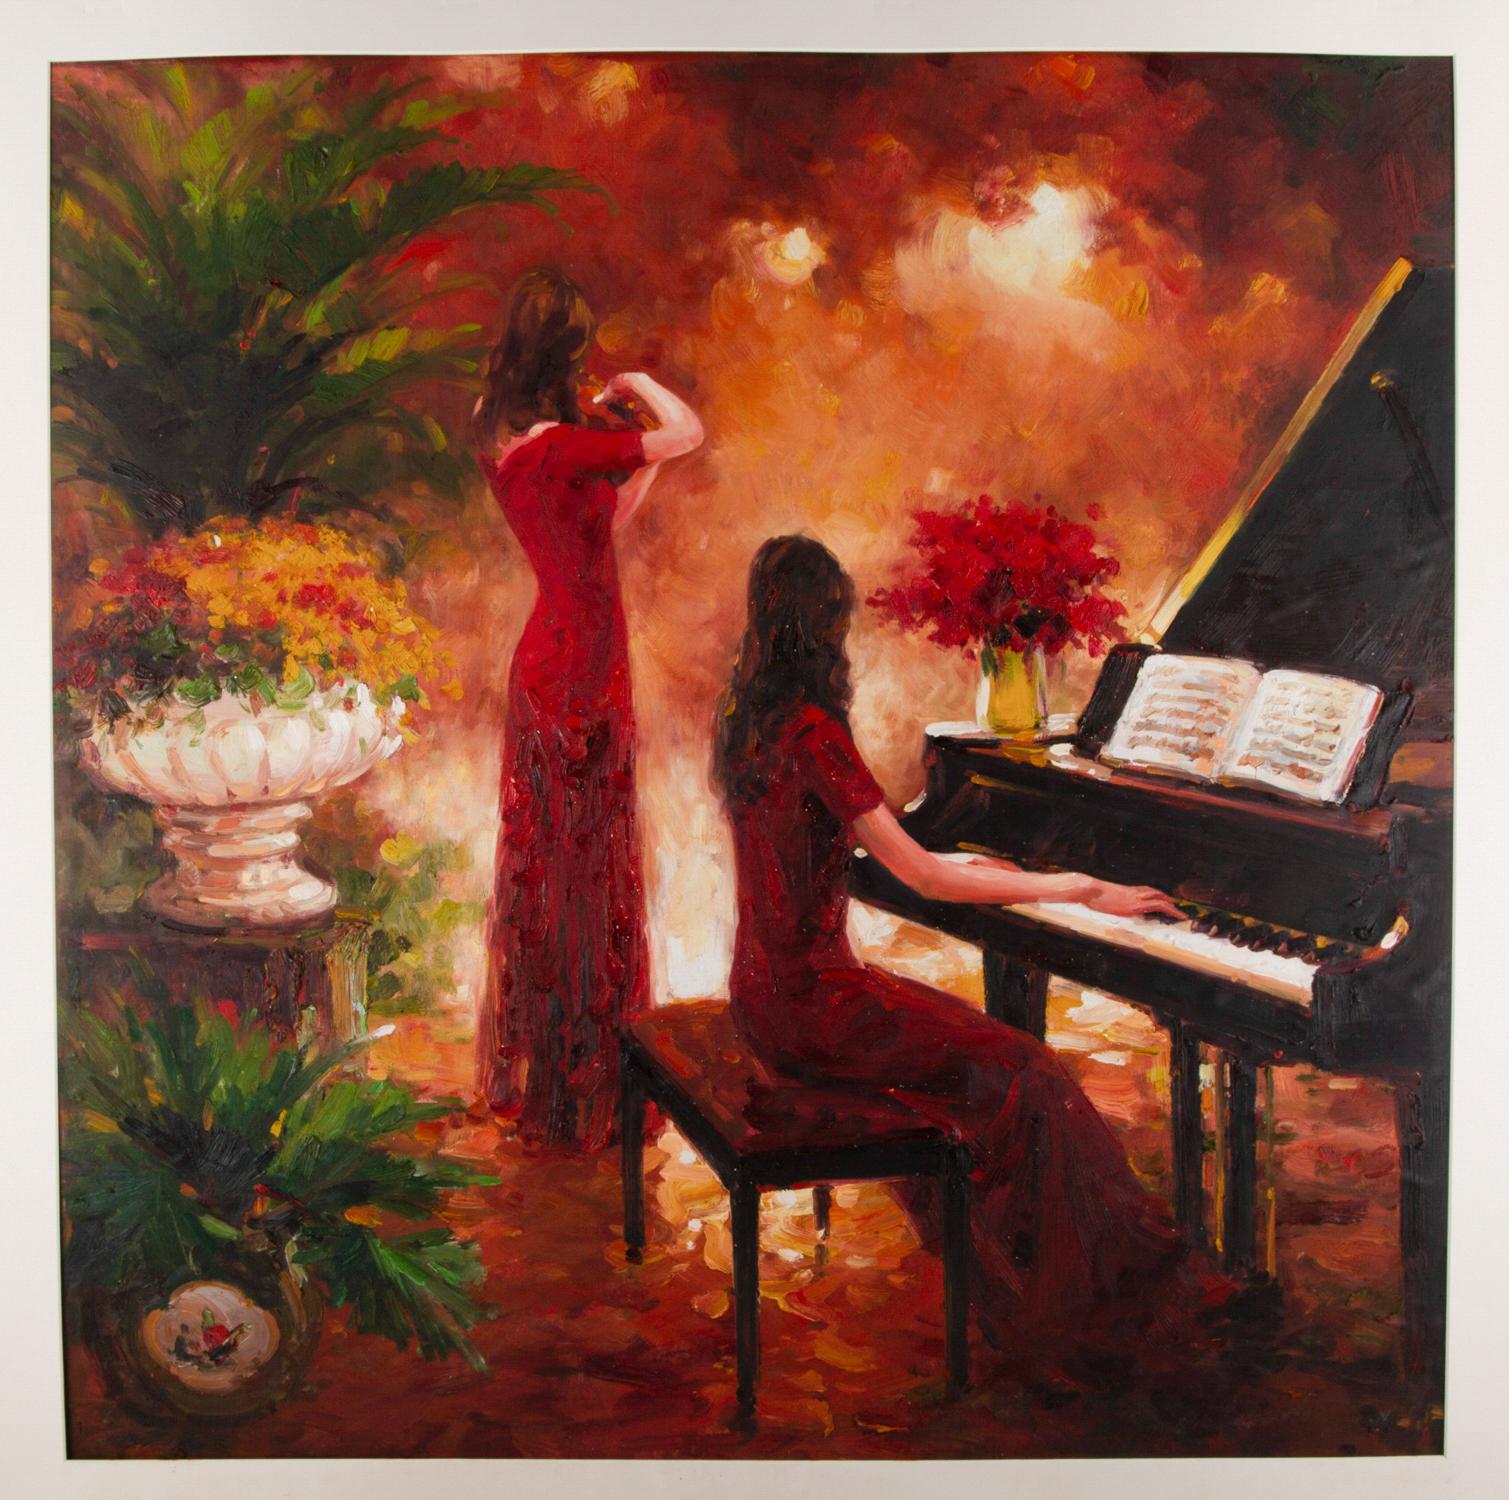 Title: Performance 2
Medium: Oil on canvas
Size: 35 x 35 inches
Frame: Framing options available!
Condition: The painting appears to be in excellent condition.

Year: 2000 Circa
Artist: Lin Hongdan
Signature: Unsigned
Signature Location: